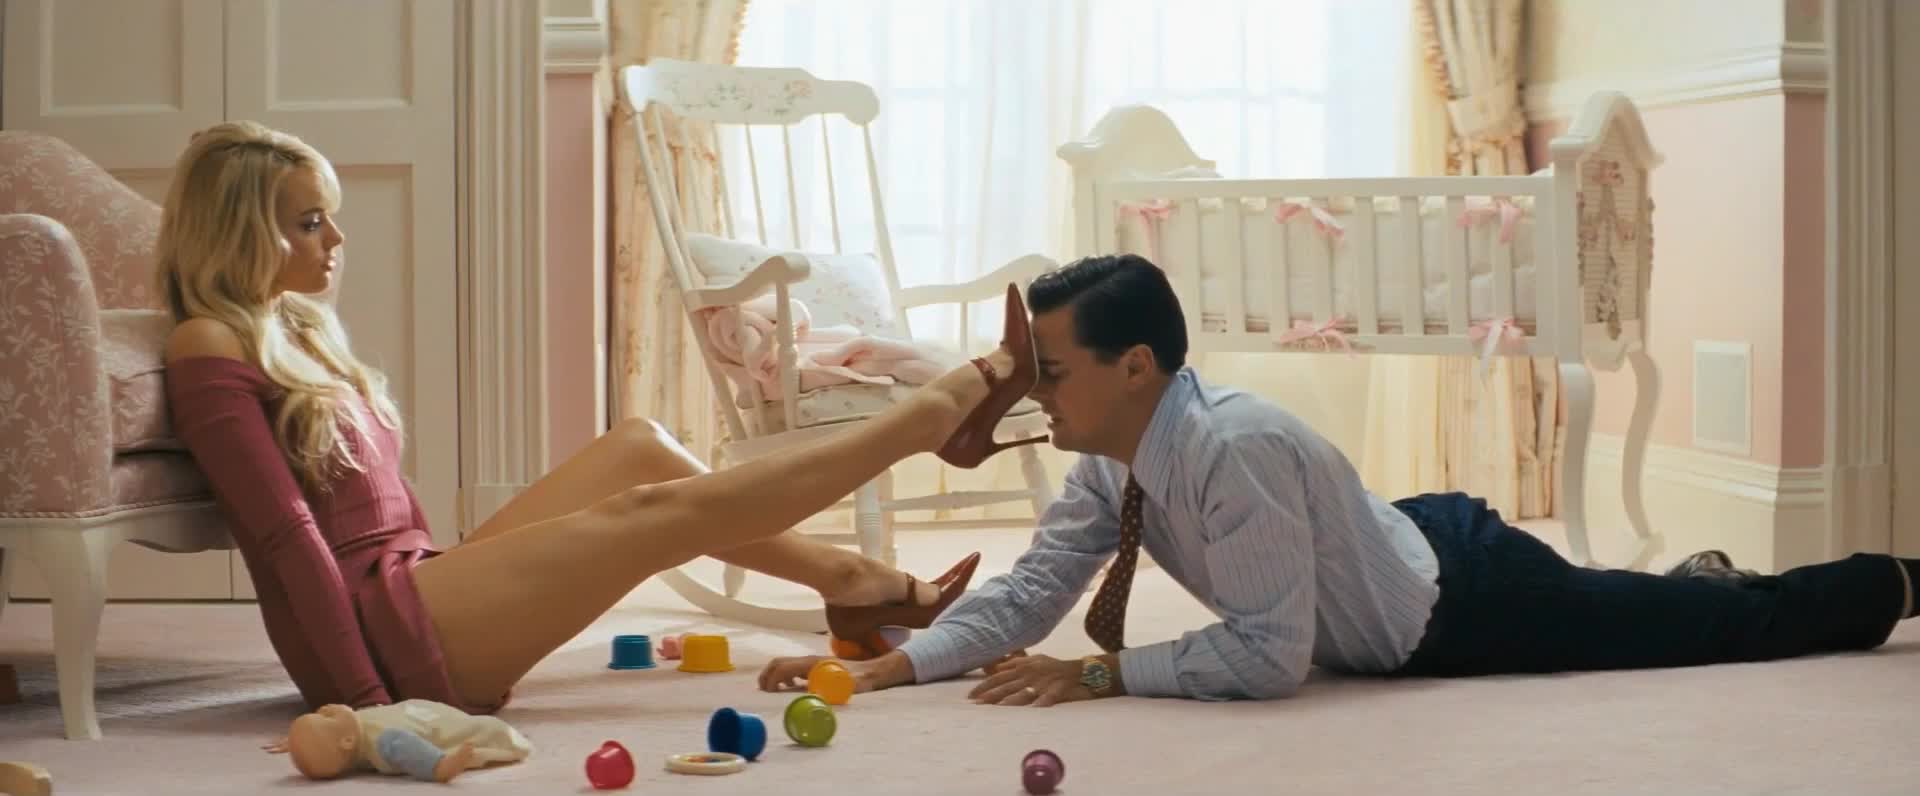   - 2014 The Wolf of Wall Street